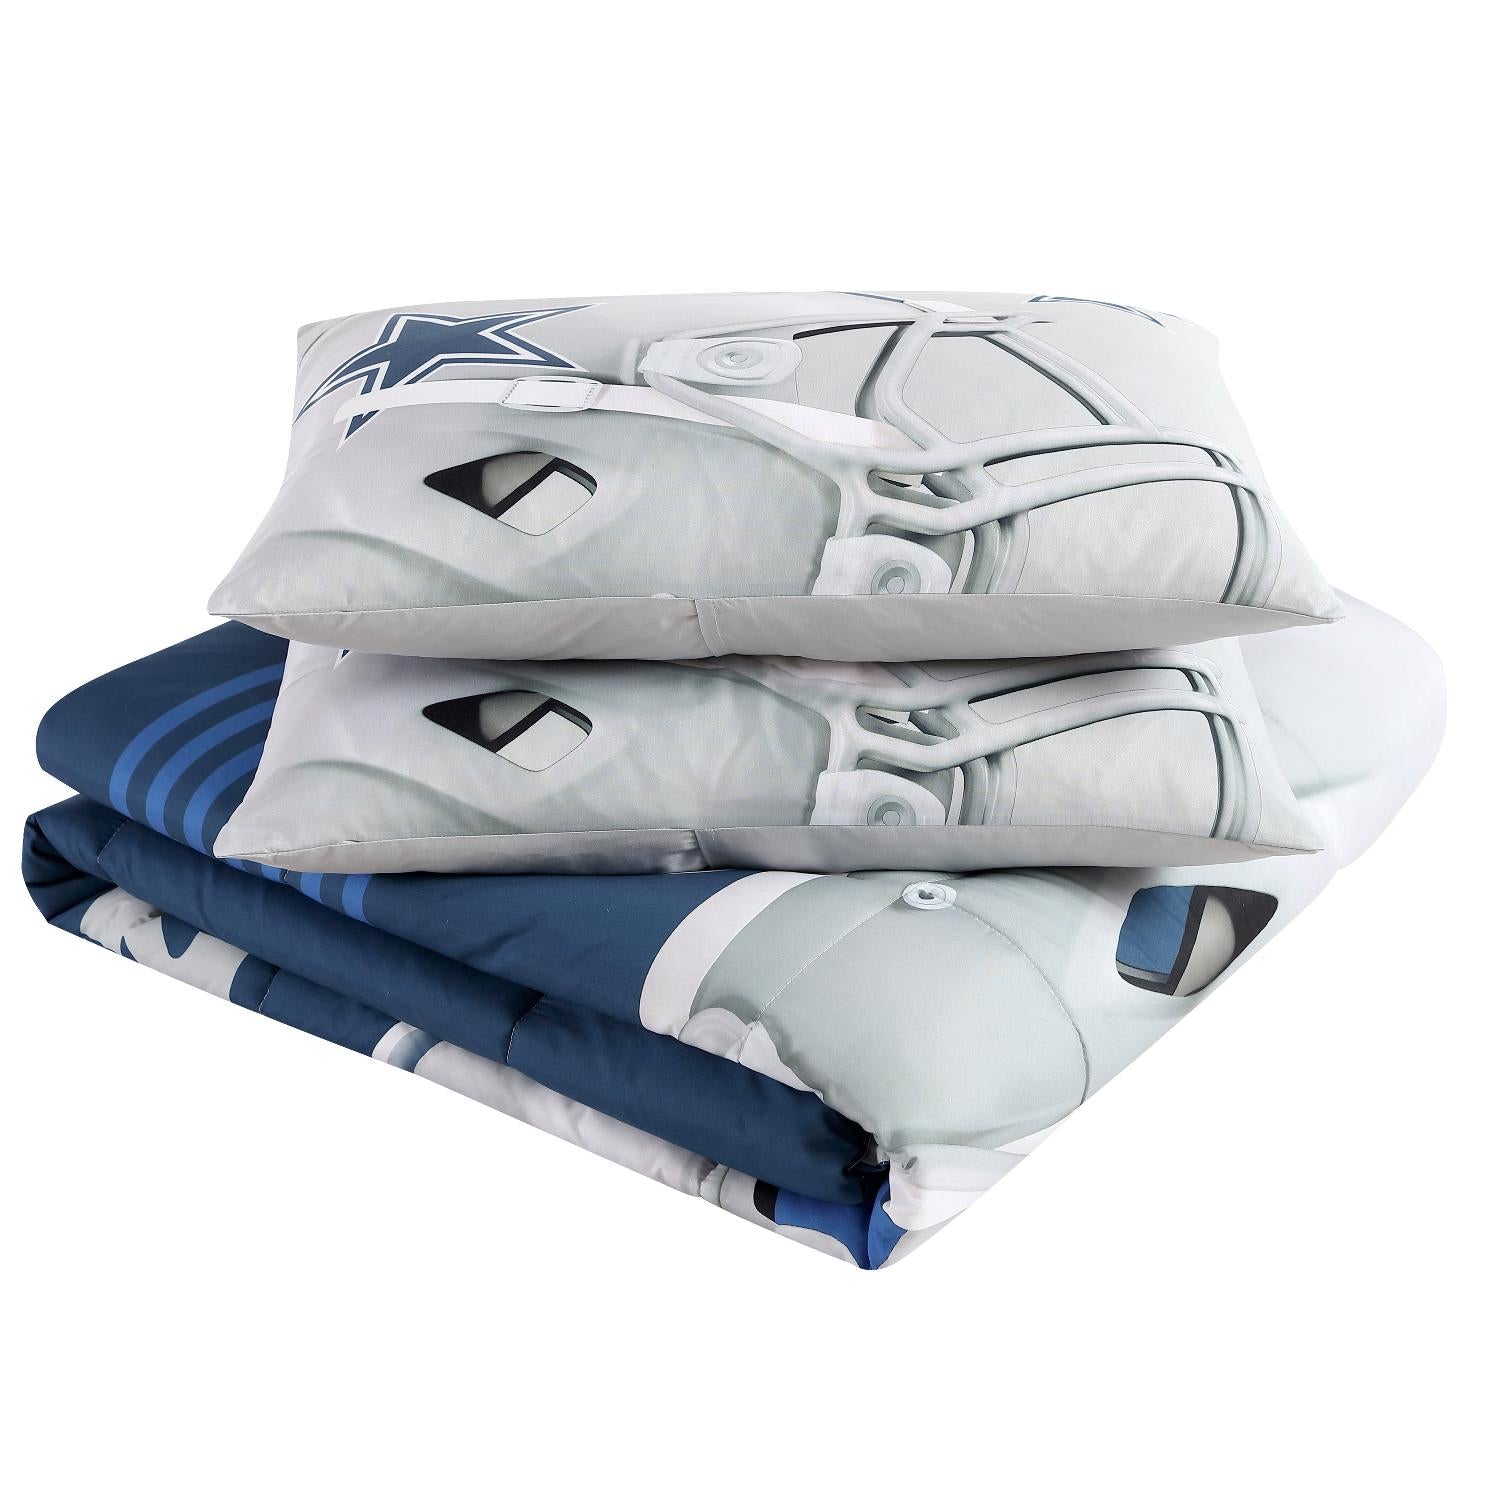 Dallas Cowboys NFL Officially Licensed 3-Piece Comforter Set - Folded